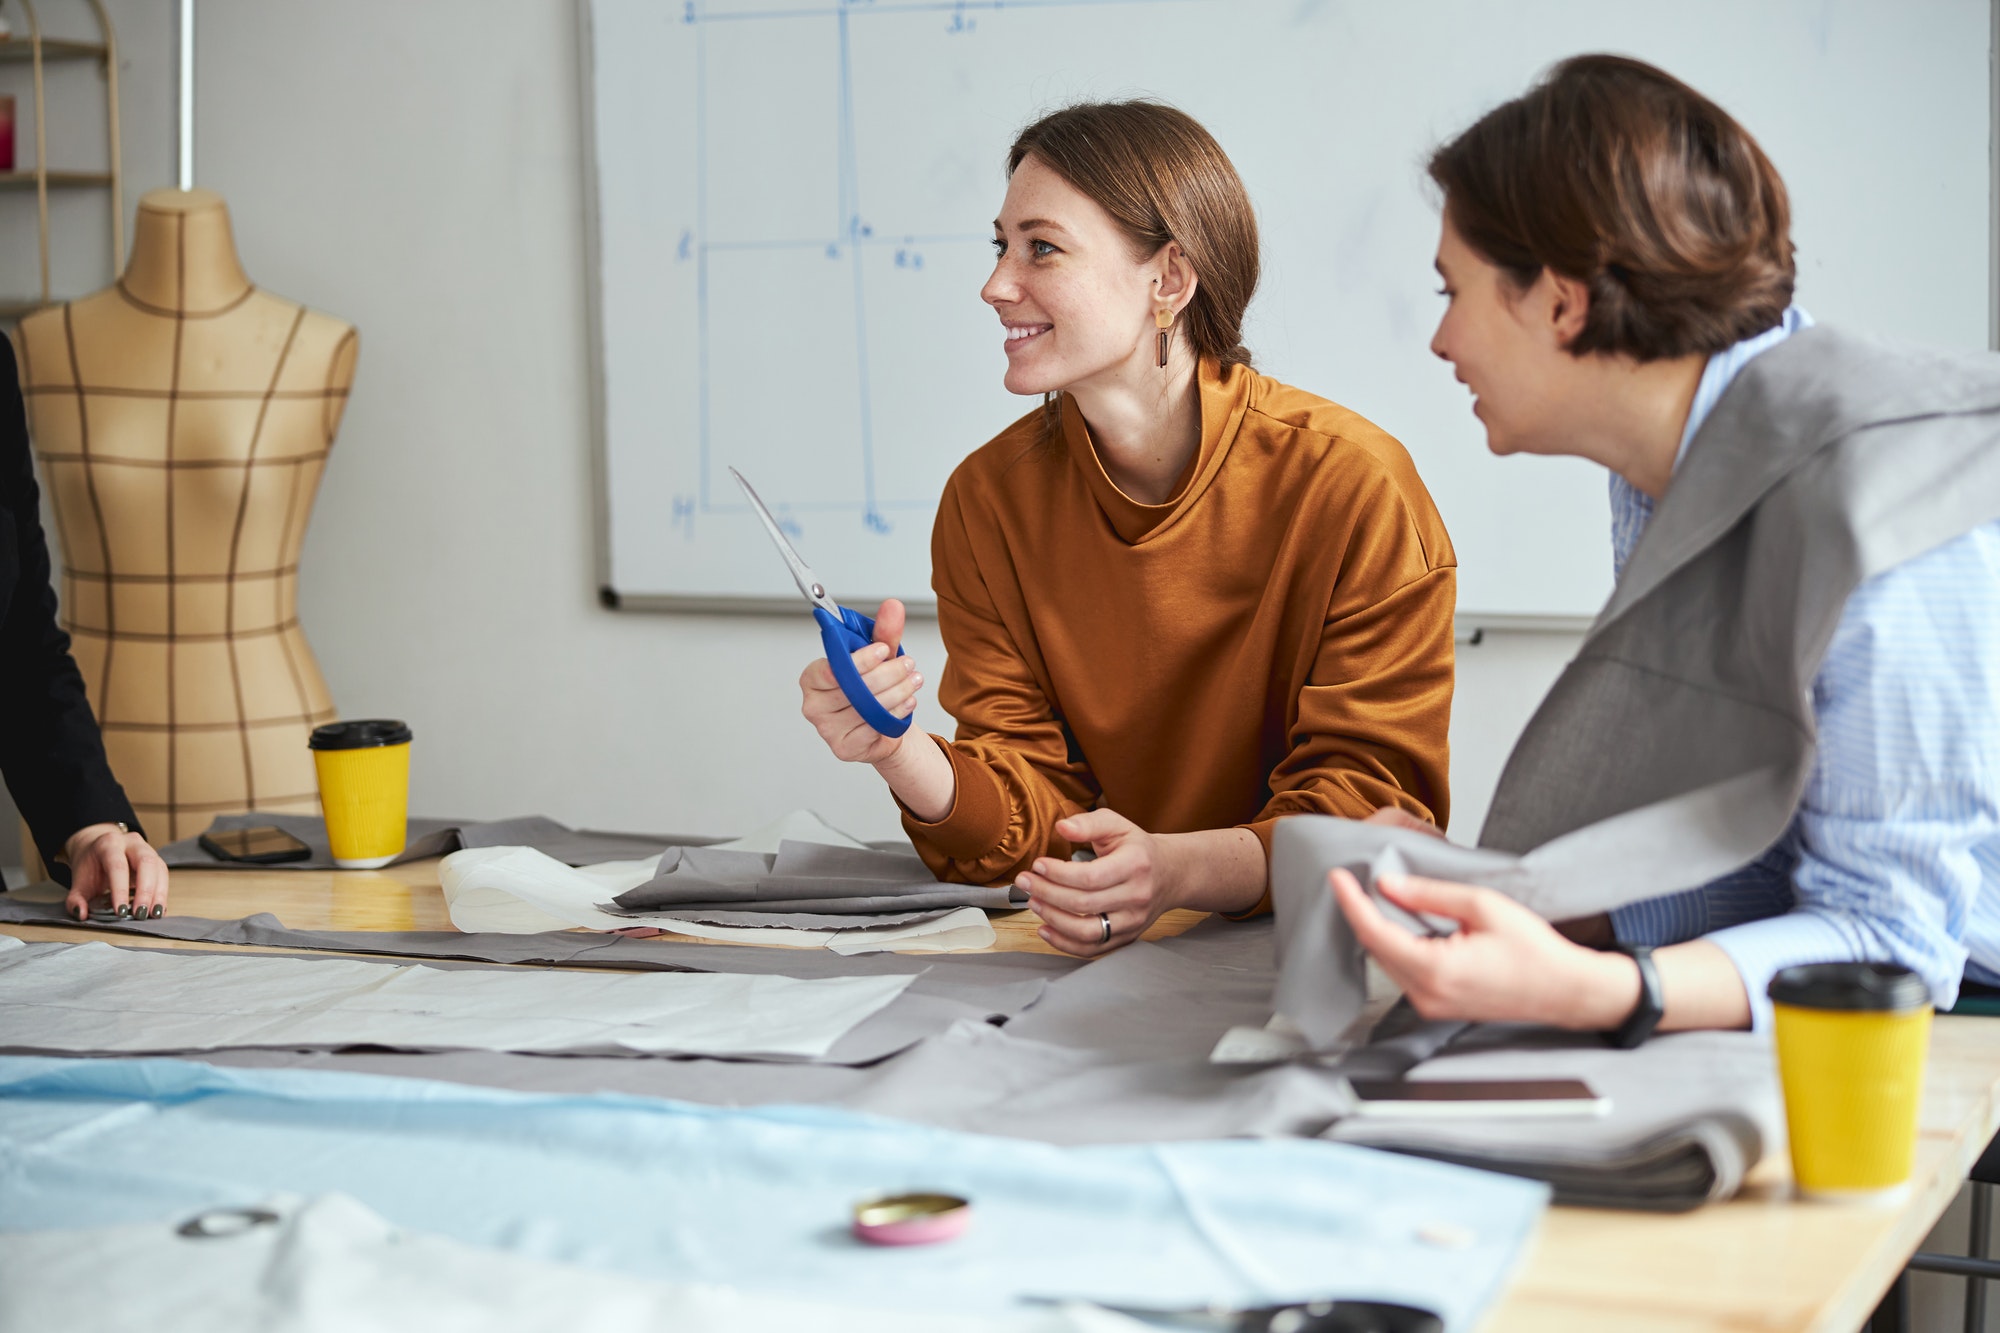 Excited female with scissors smiling to design teacher